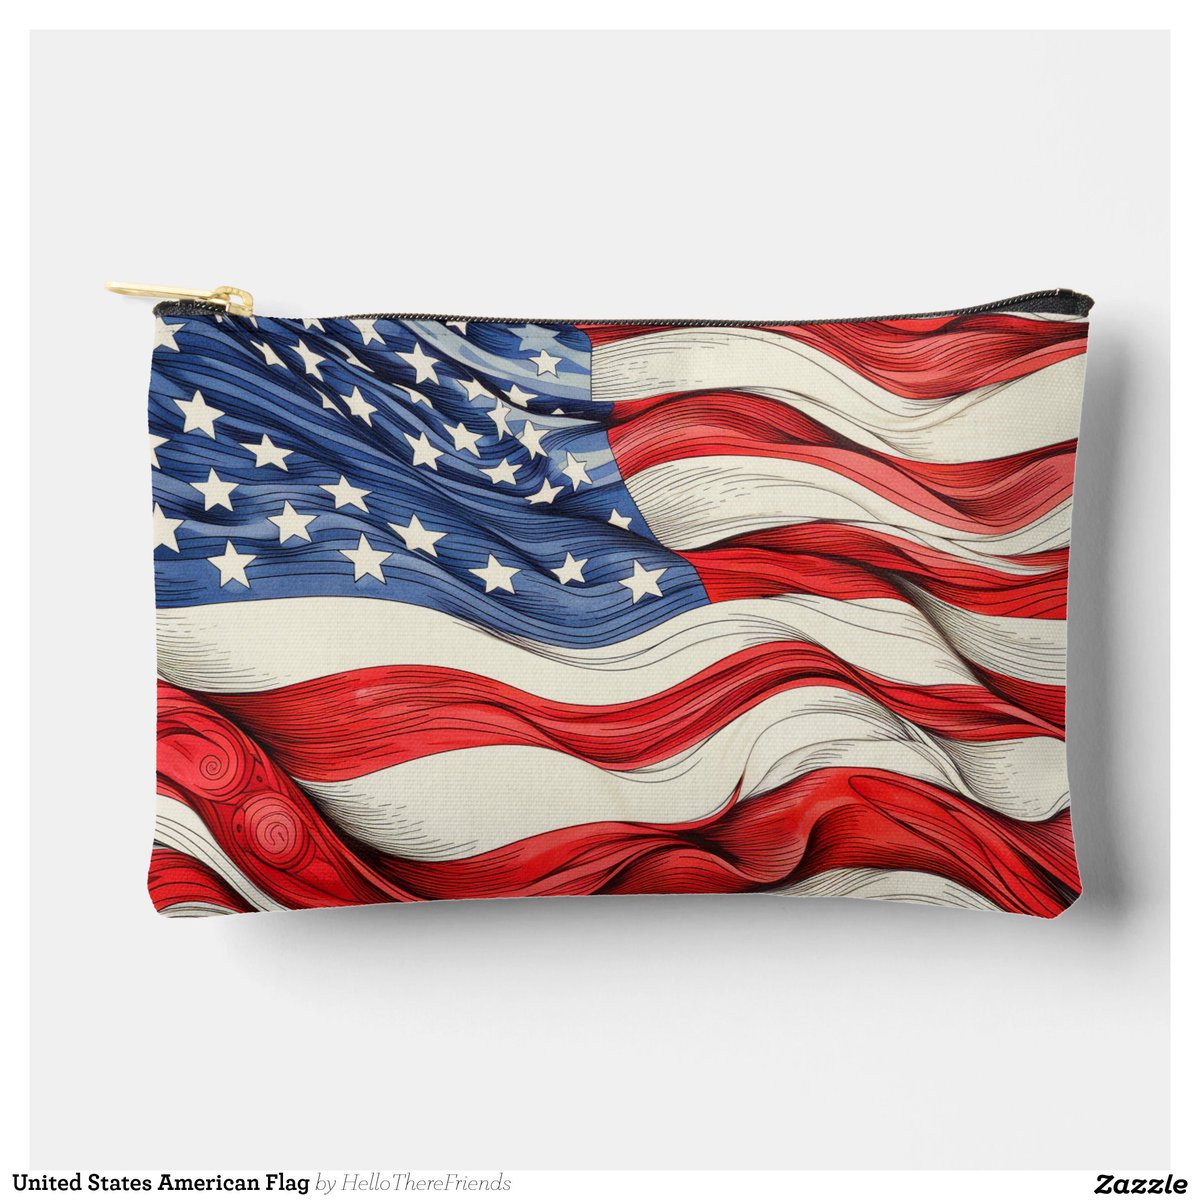 Patriotic United States American Flag Accessory Pouch→zazzle.com/z/azb4zbo9?rf=…

#Handbag #MakeupBag #Pulse #TravelBag #CosmeticBag #GiftIdeas #Gifts #BirthdayGifts #MothersDay #Bags #Zazzle